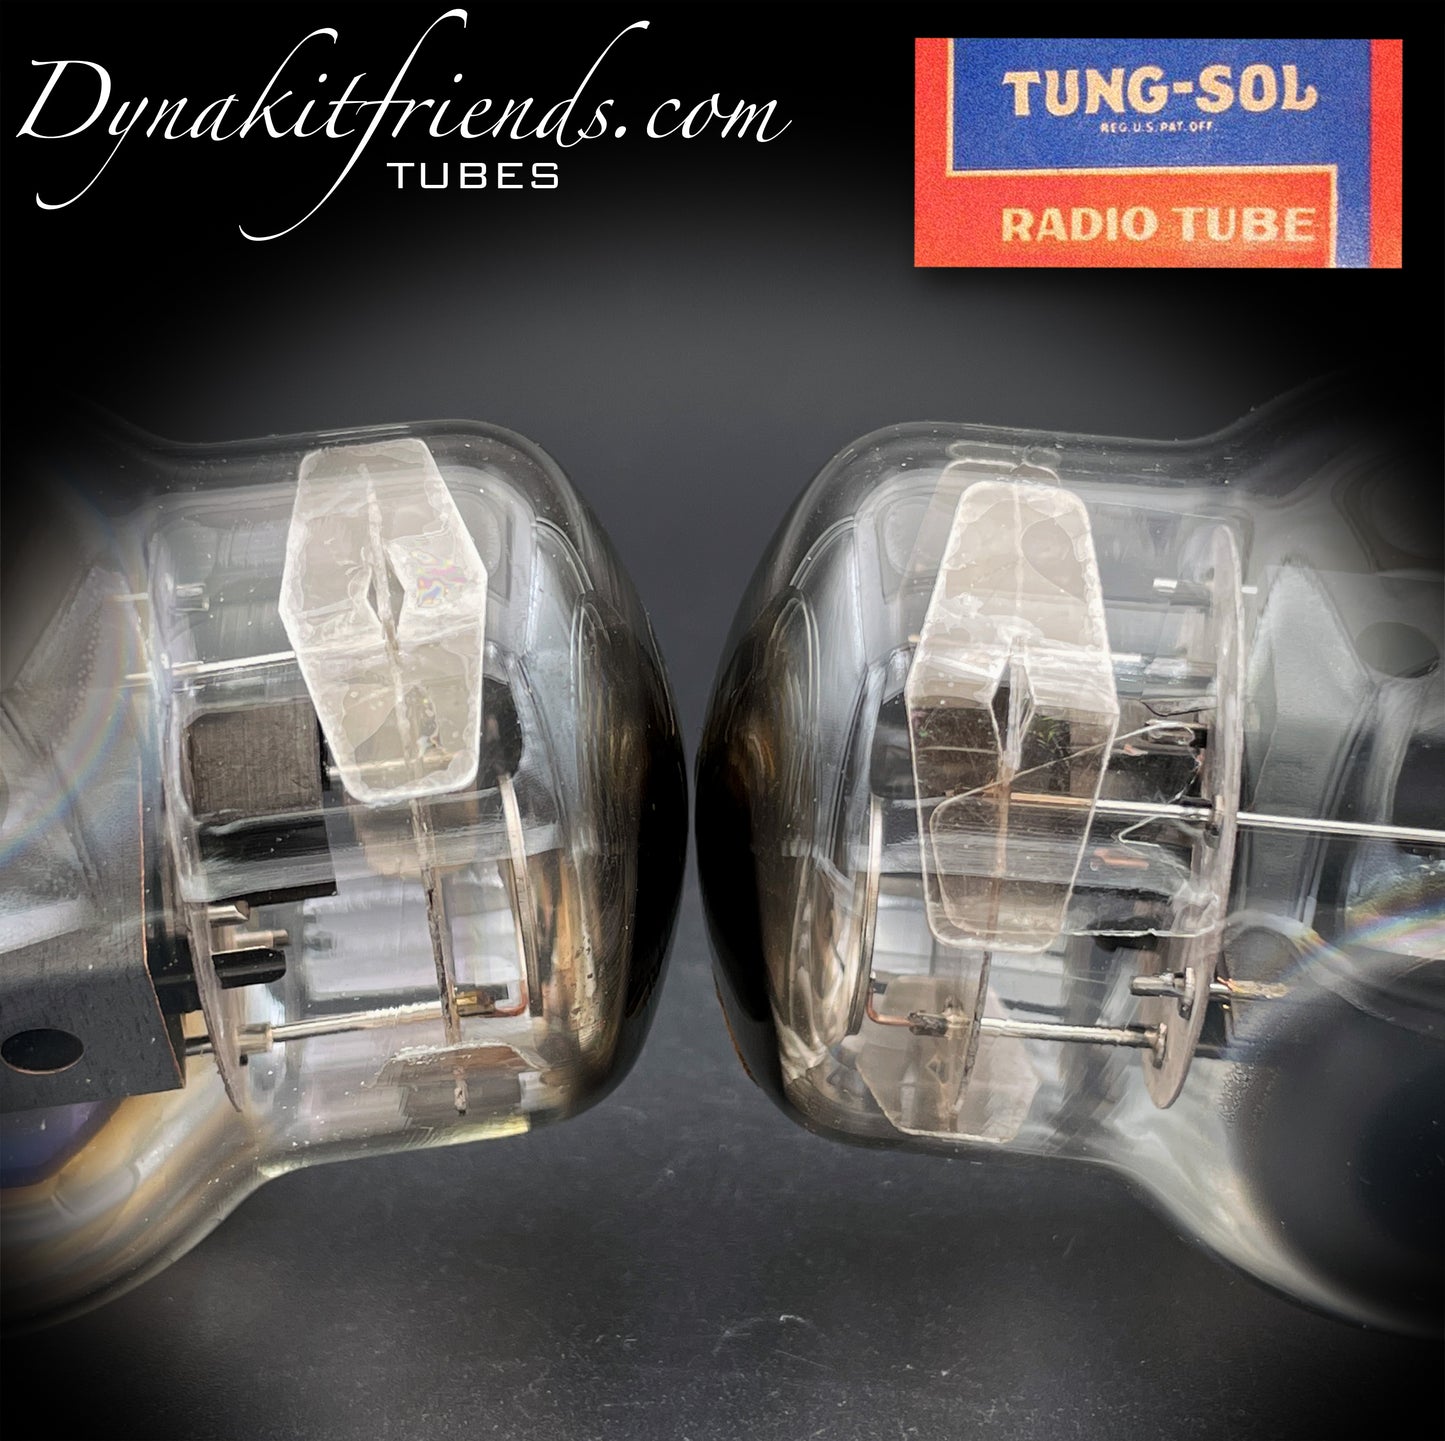 6550 TUNG-SOL Vintage Type 2 - 4th Generation Gray Plates Triple Halo Getter Three Holes Matched Tubes Made in USA